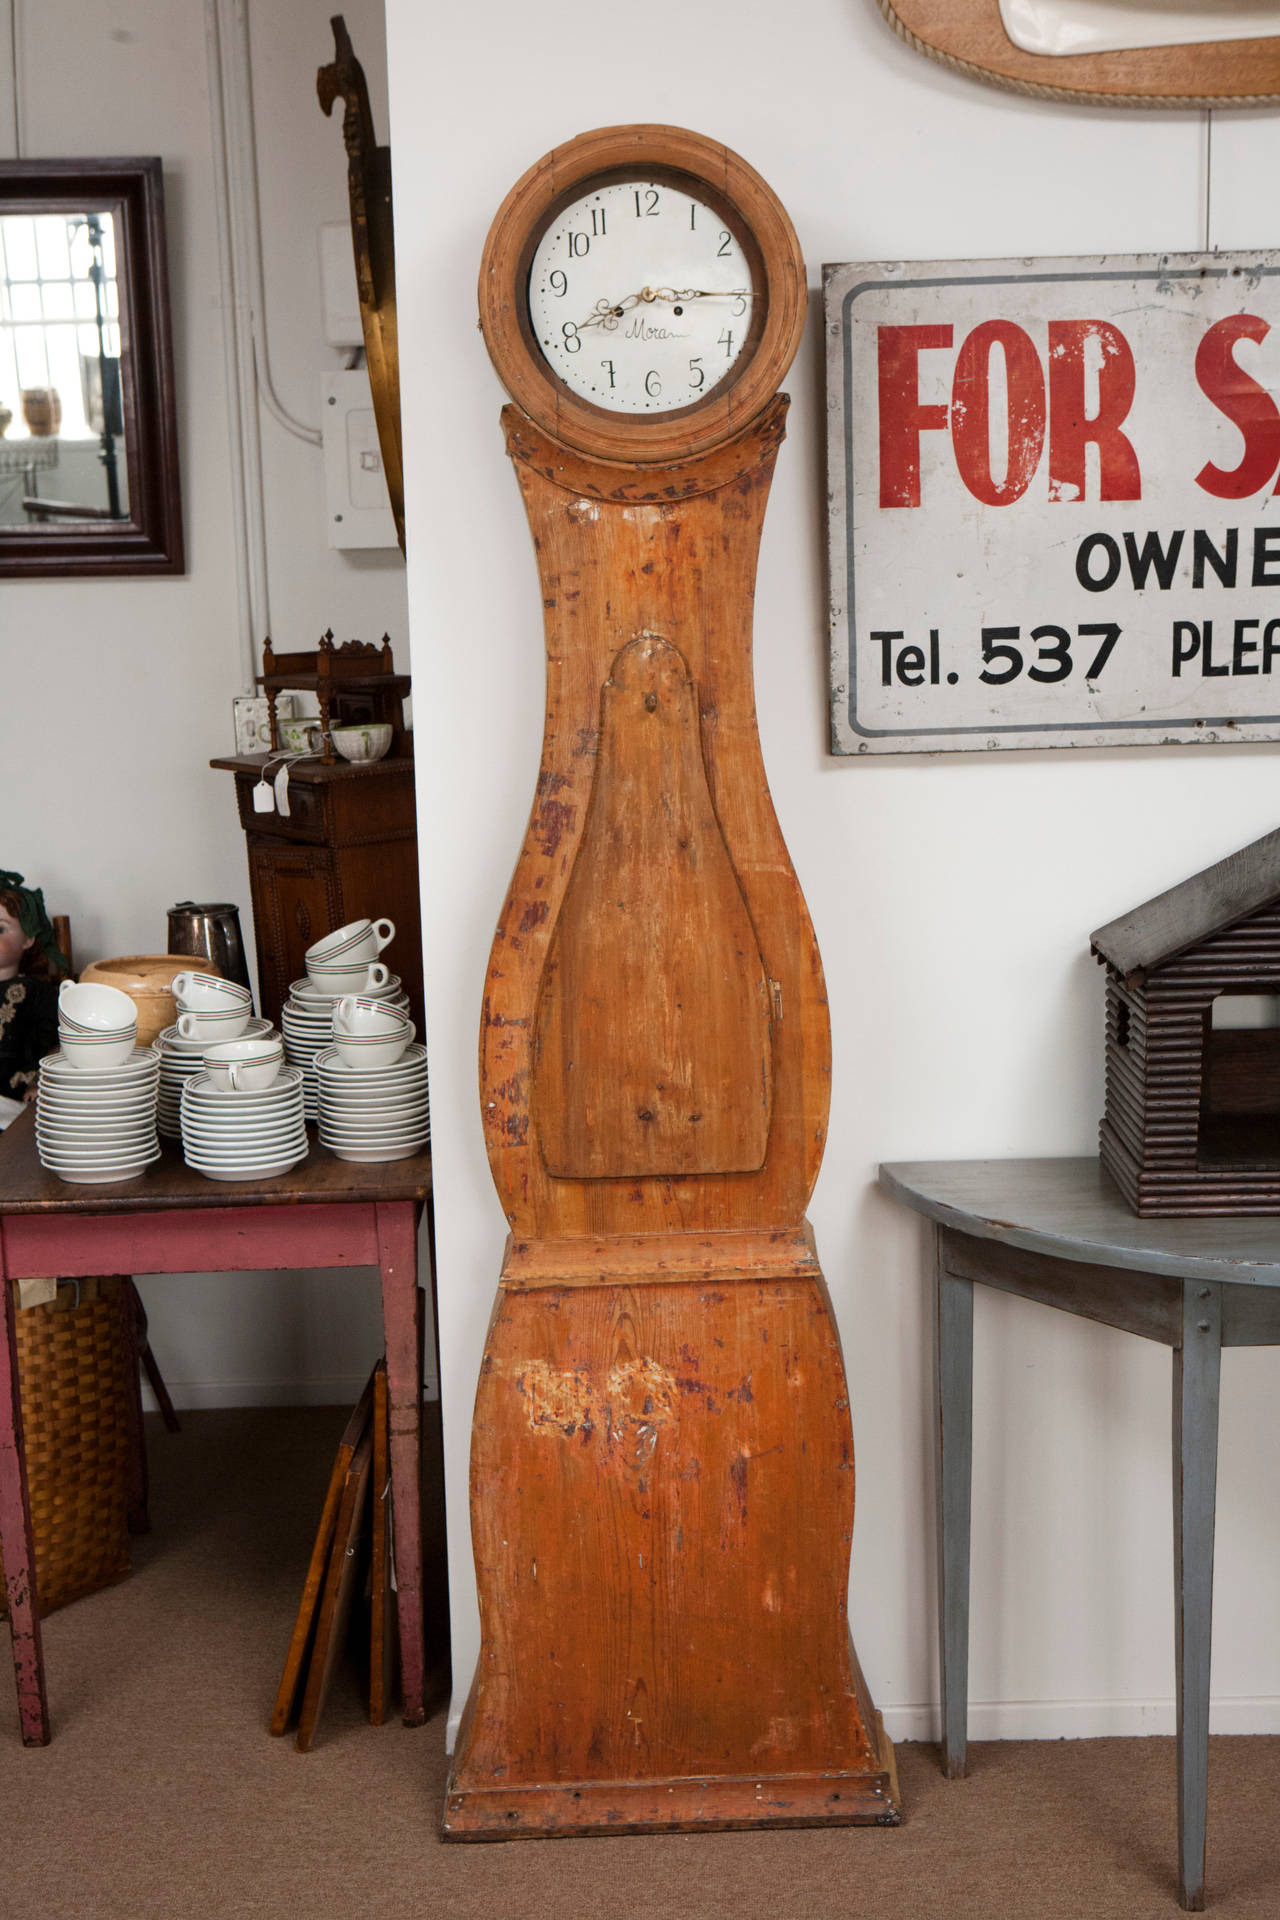 This slender Mora pine long case clock has been stripped down to its original burnt orange color with remnants of old paint. Gustavian Mora clocks are a type of long case clock which were made in, and derived their name from, the town of Mora in